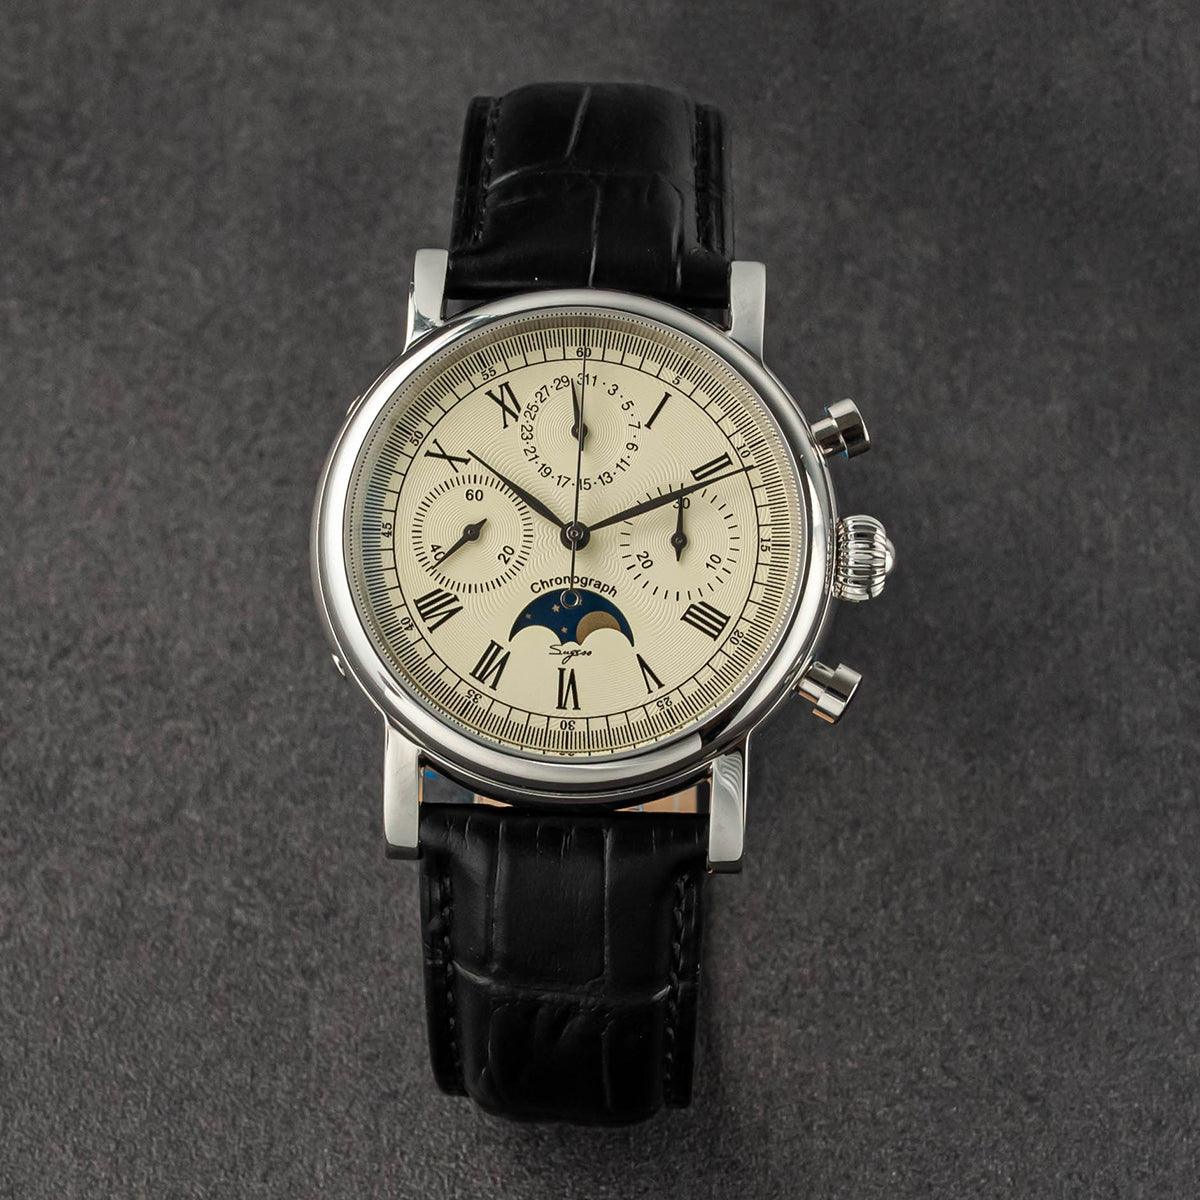 Sugess Moon Phase Watch with Seagull ST1908 Gooseneck Mechanical Movement - Murphy Johnson Watches Co.